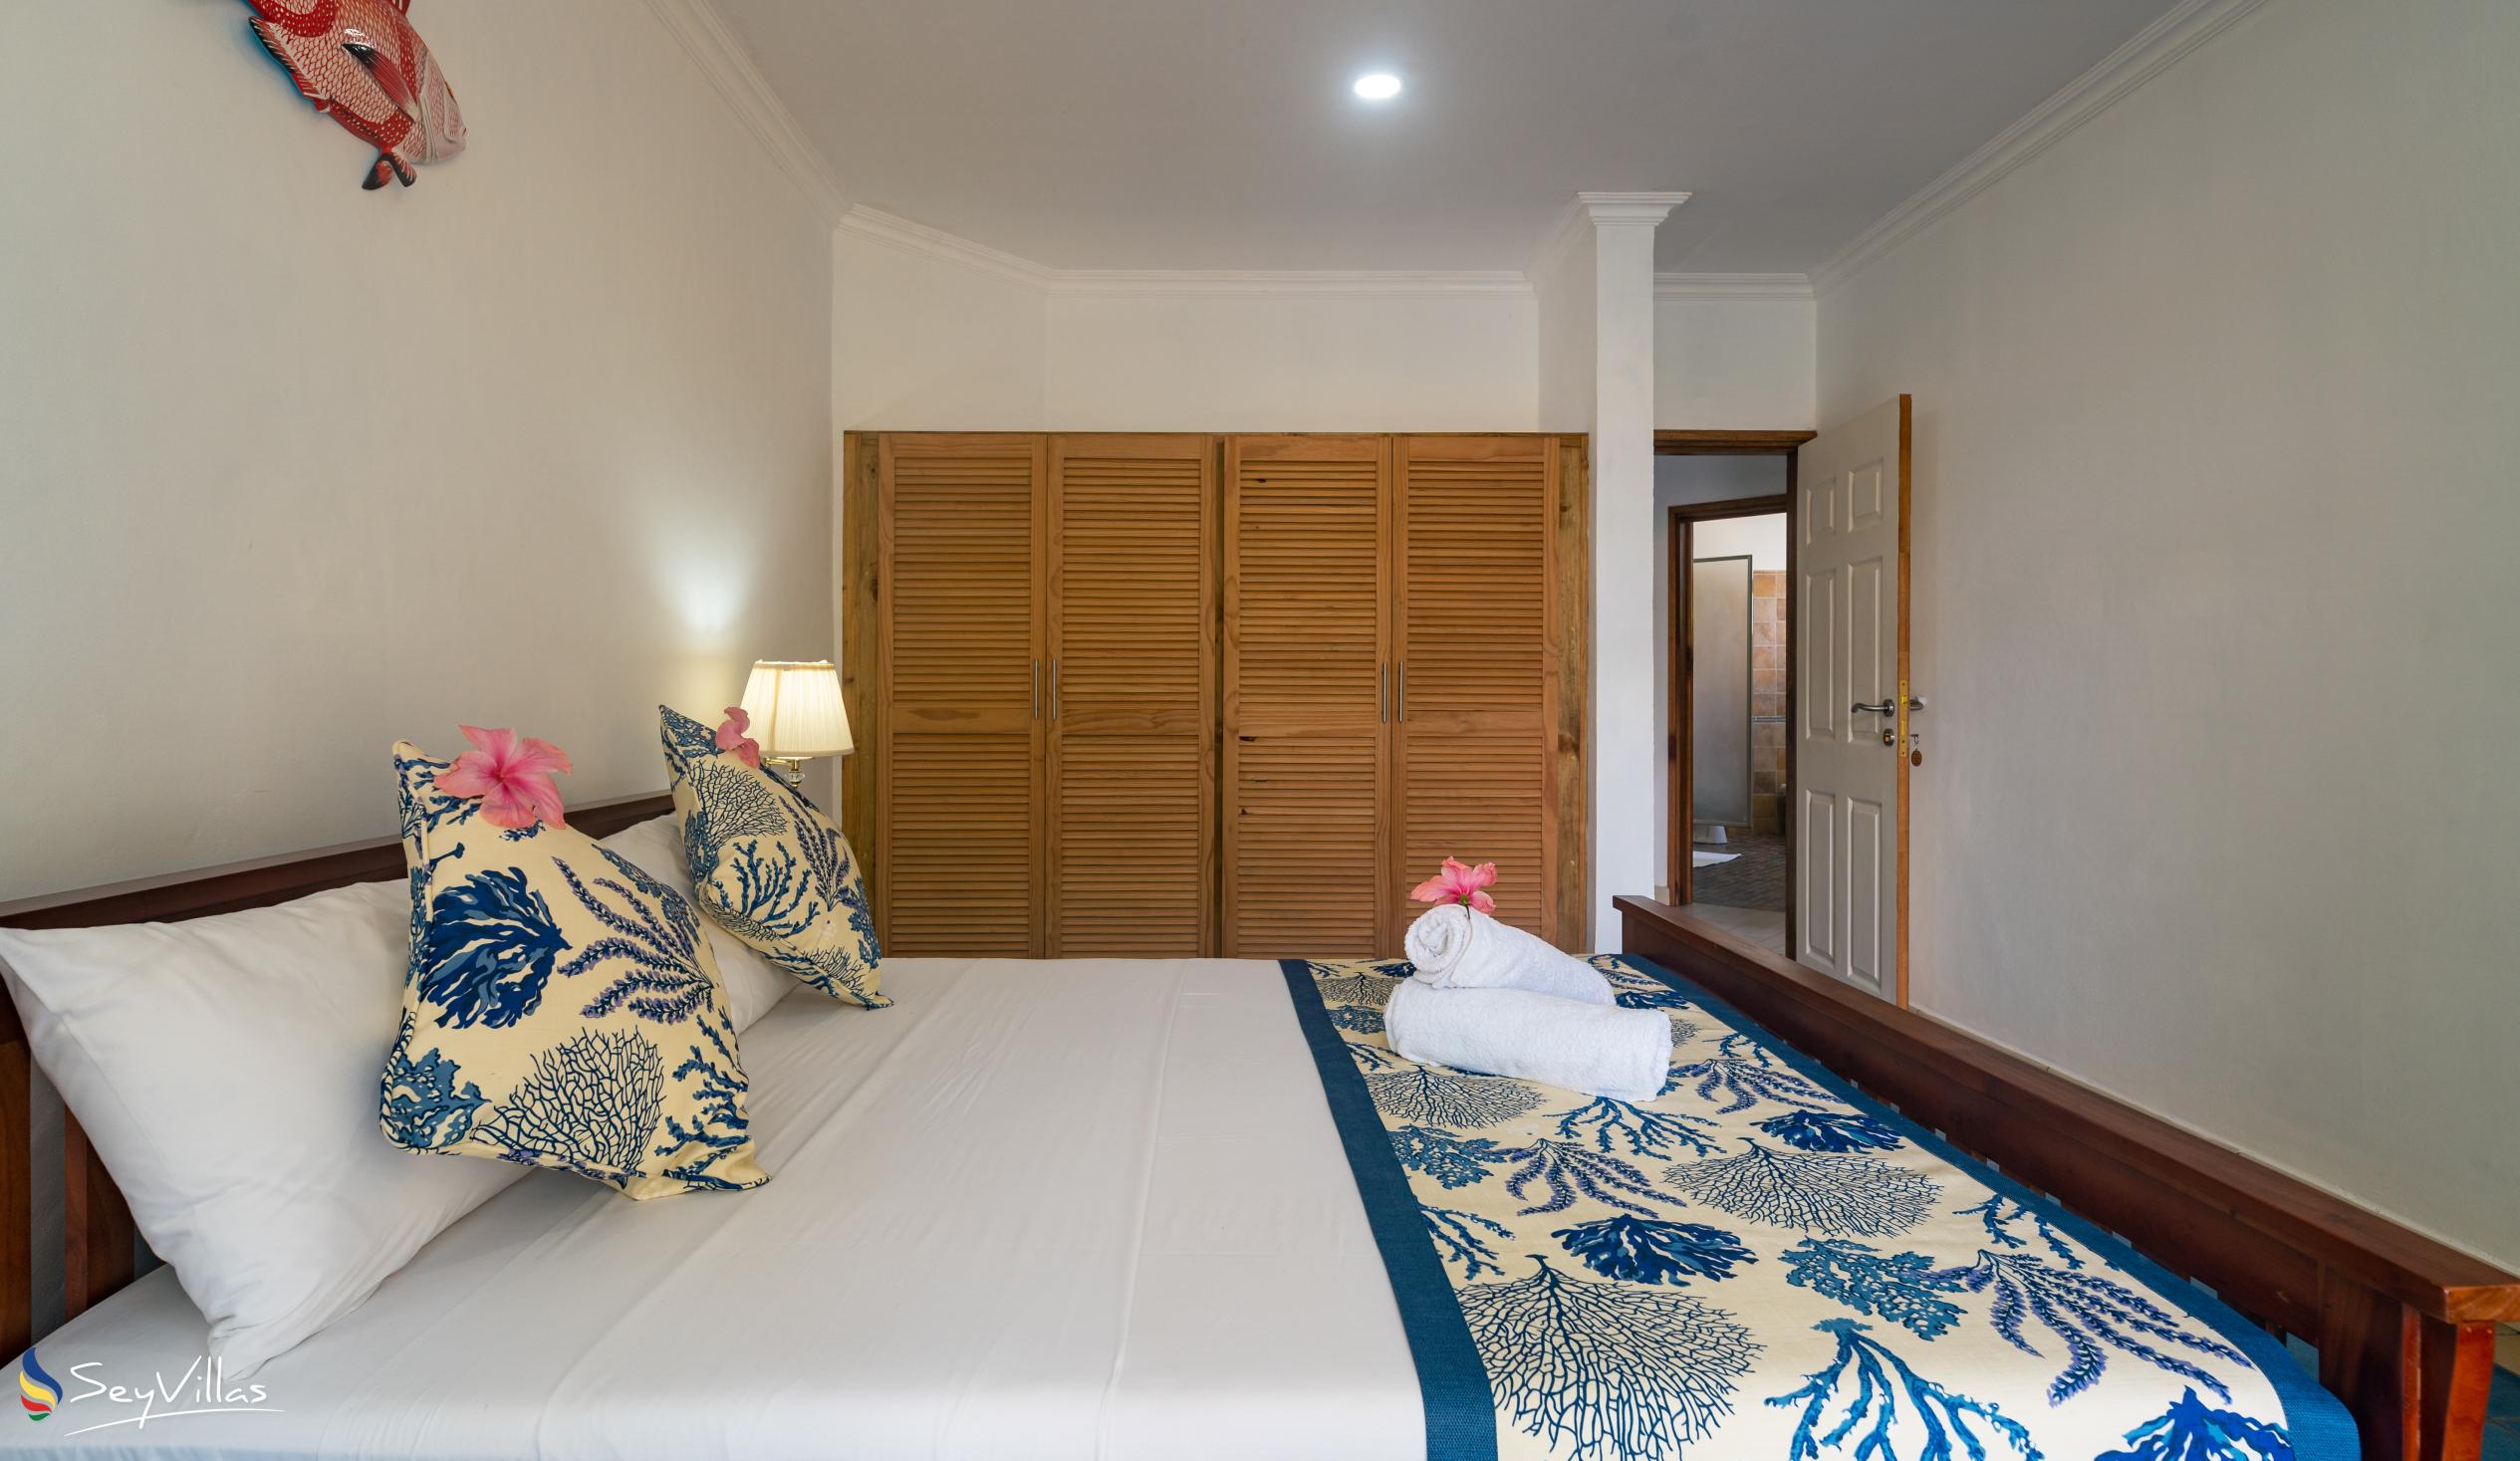 Photo 96: 340 Degrees Mountain View Apartments - Standard Double Room with Garden View - Mahé (Seychelles)